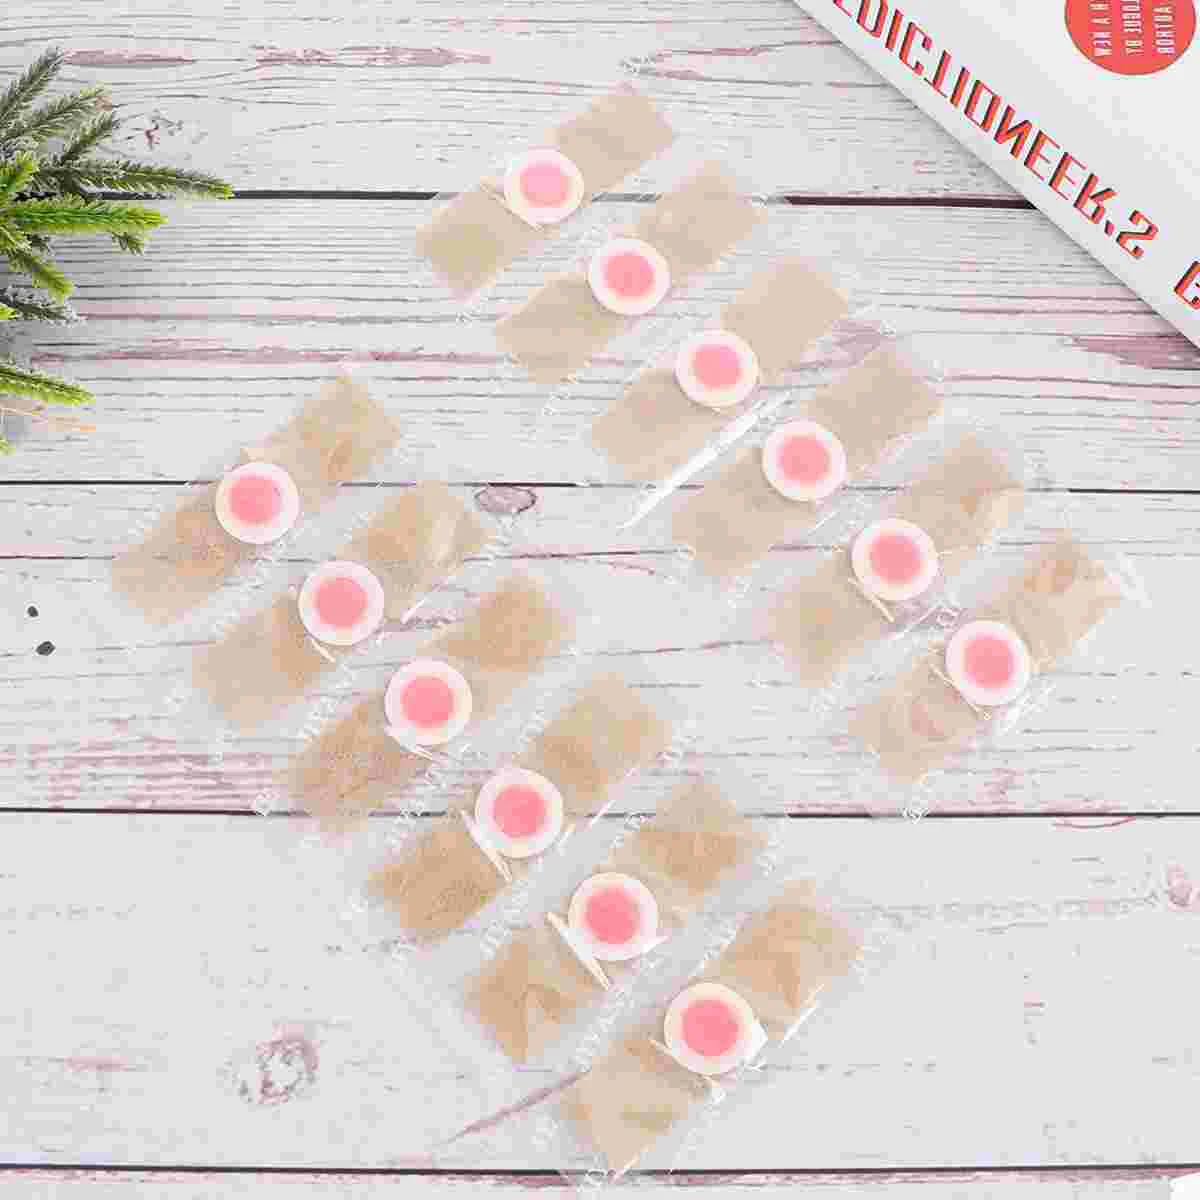 

Corn Toe Pads Callus Pad Cushions Protector Cushion Bunion Remover Treatment Self Adhesive Removal Sticker